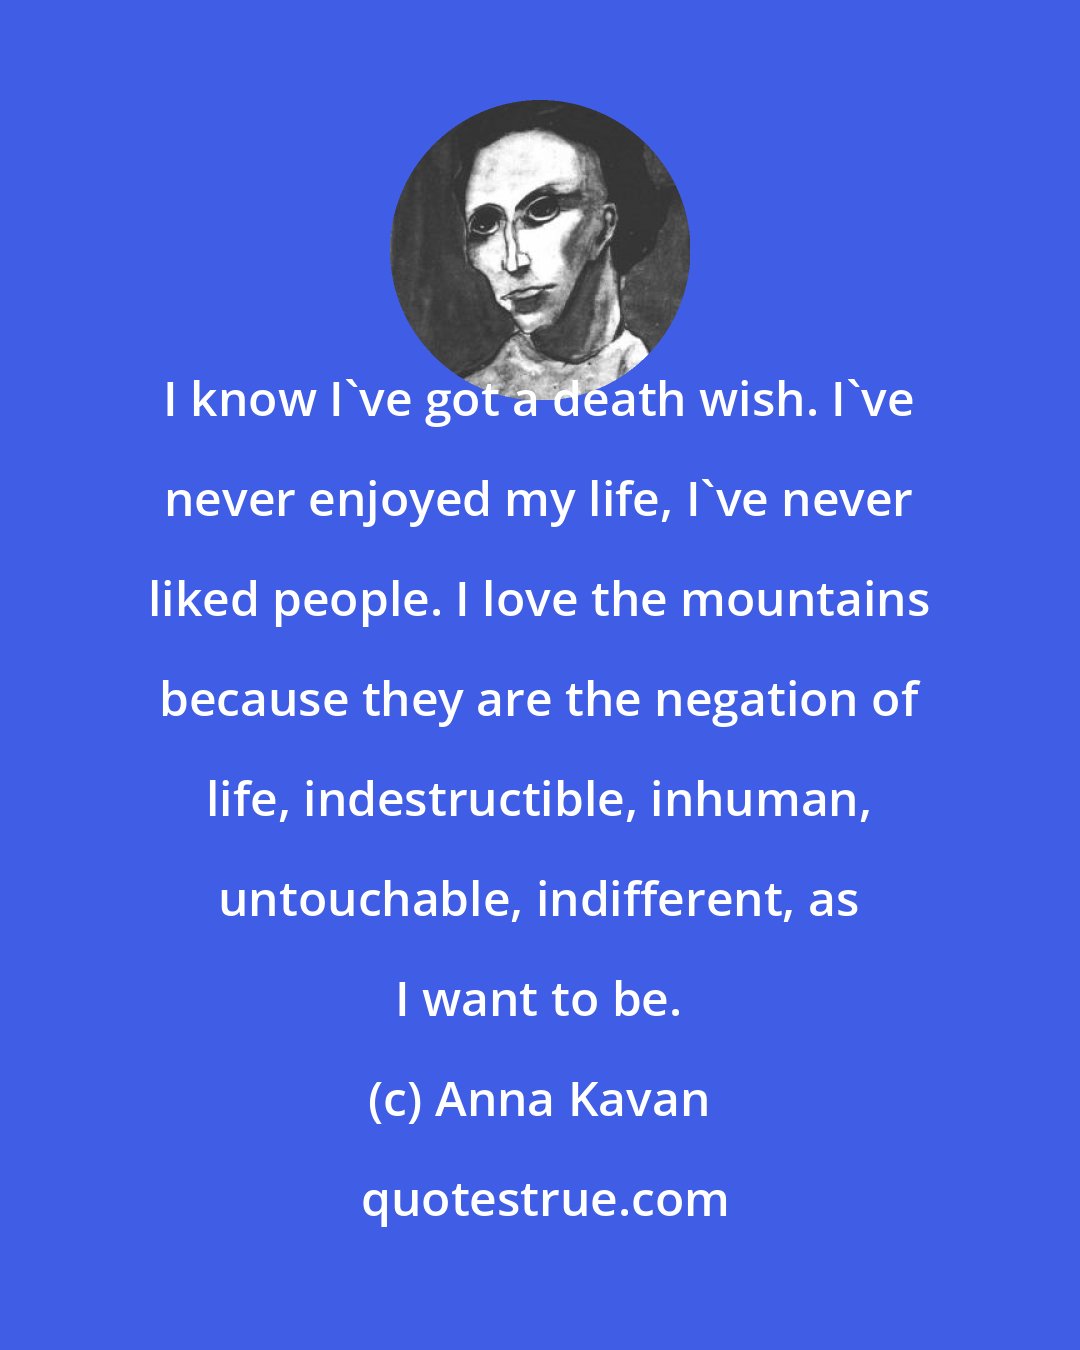 Anna Kavan: I know I've got a death wish. I've never enjoyed my life, I've never liked people. I love the mountains because they are the negation of life, indestructible, inhuman, untouchable, indifferent, as I want to be.